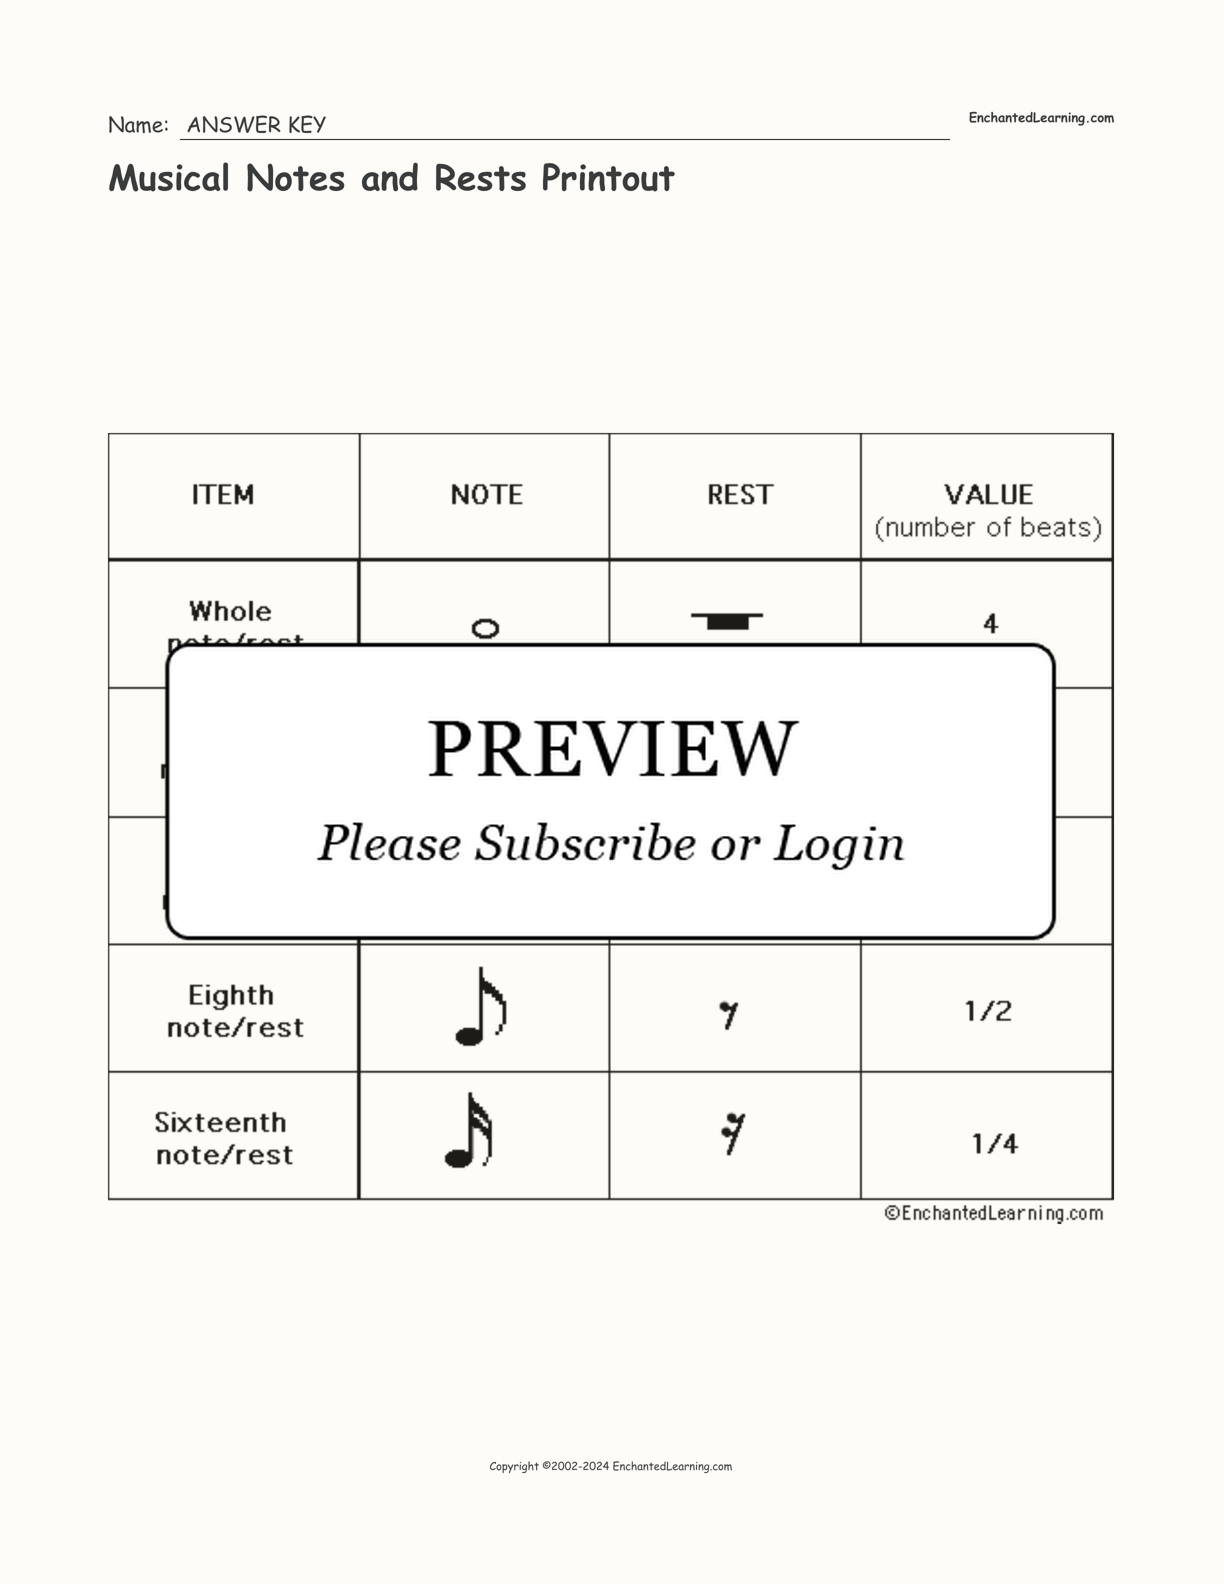 Musical Notes and Rests Printout interactive worksheet page 2